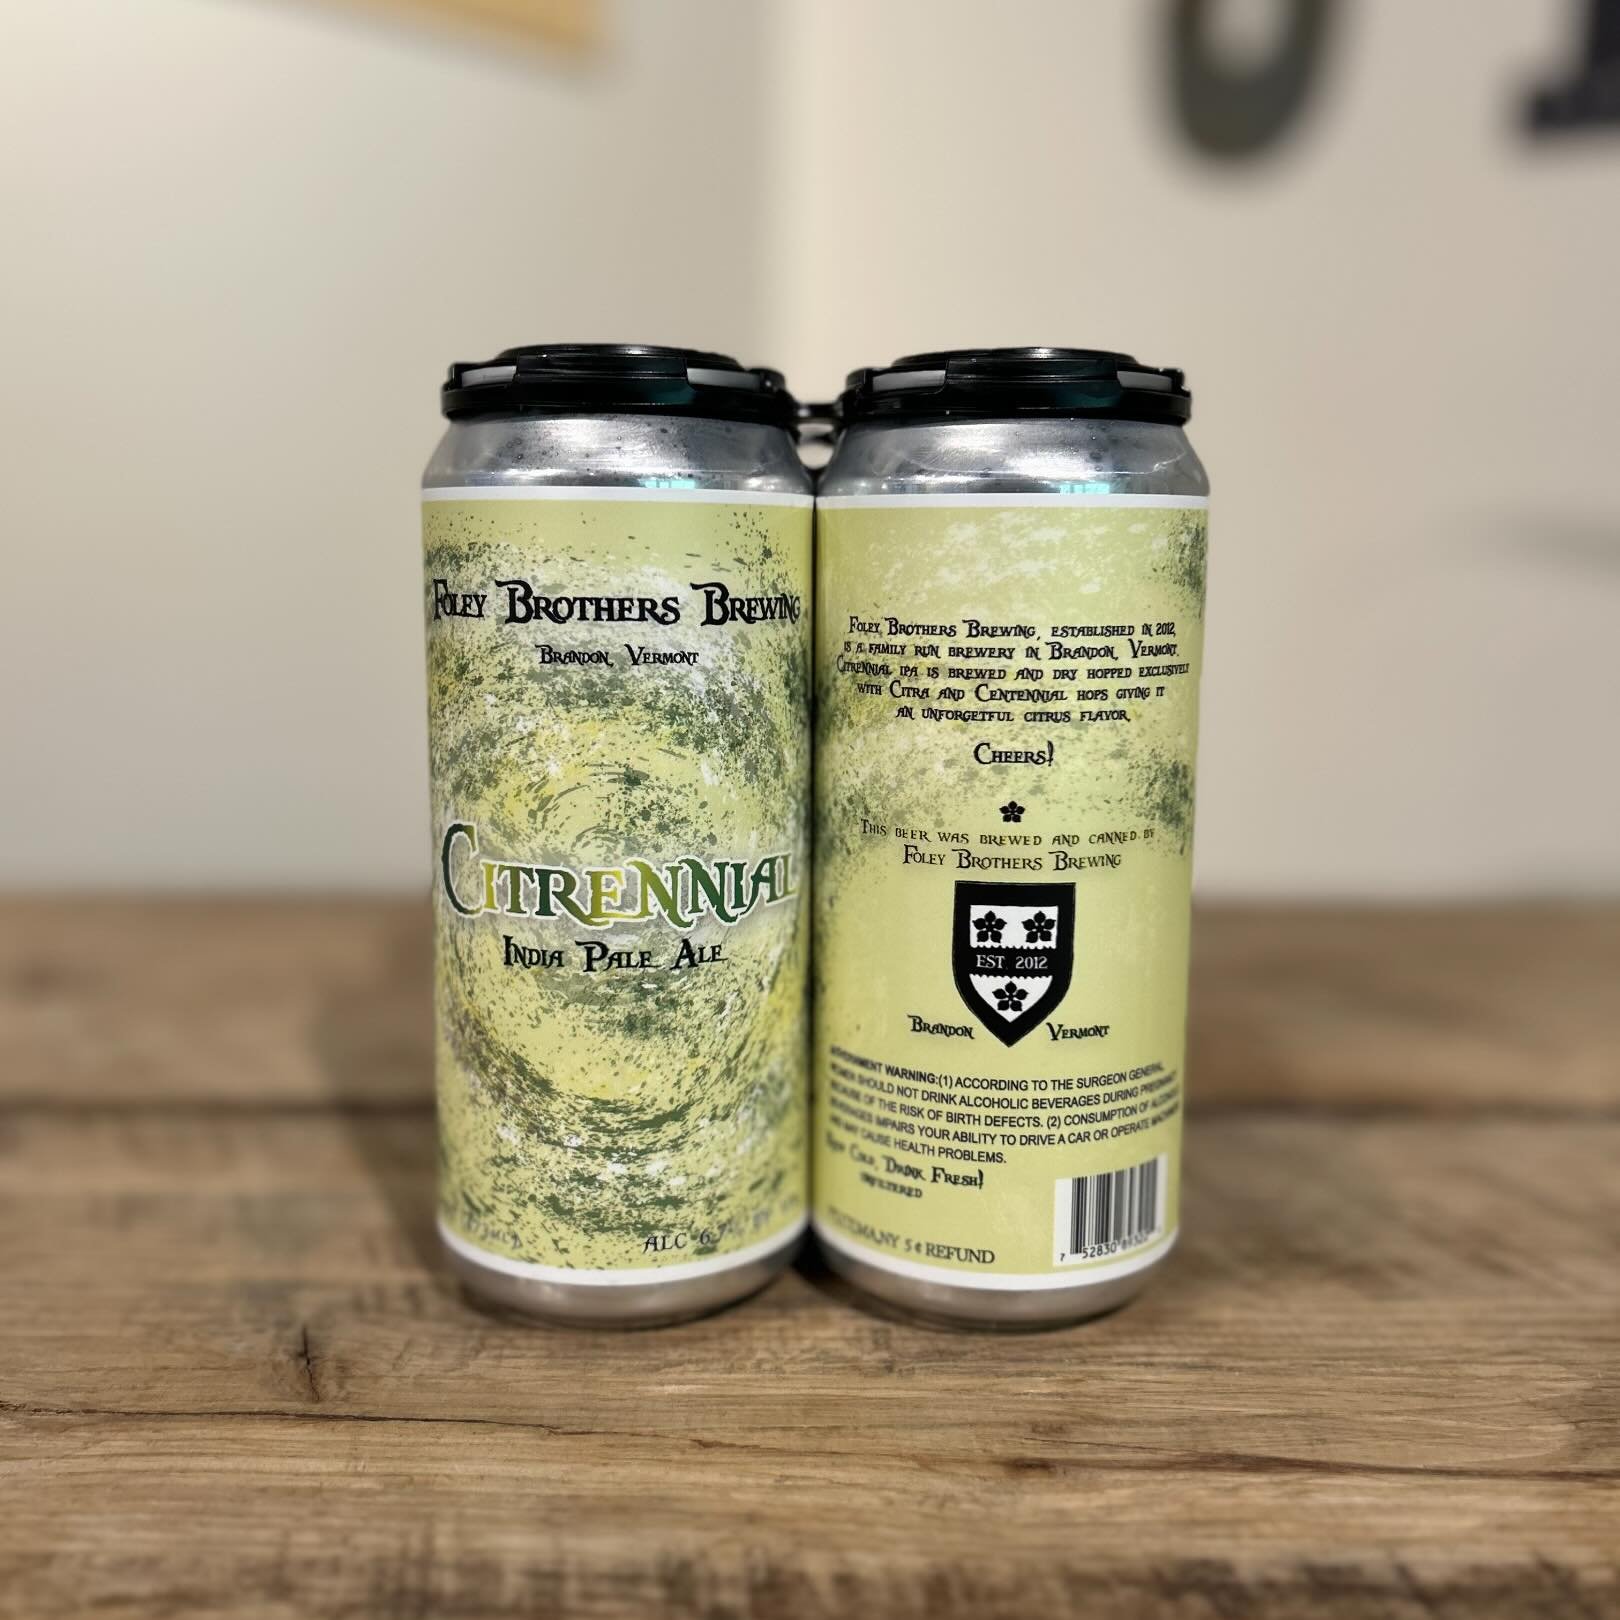 Welcoming @foleybrothers back to the shop this week #NowAvailable #SudburyCraftBeer #TheSuds
&mdash;
Citrennial // IPA // 6.7% ABV

Born from our two favorite hops, Citra and Centennial. This New England IPA has notes of both citrus and mango.